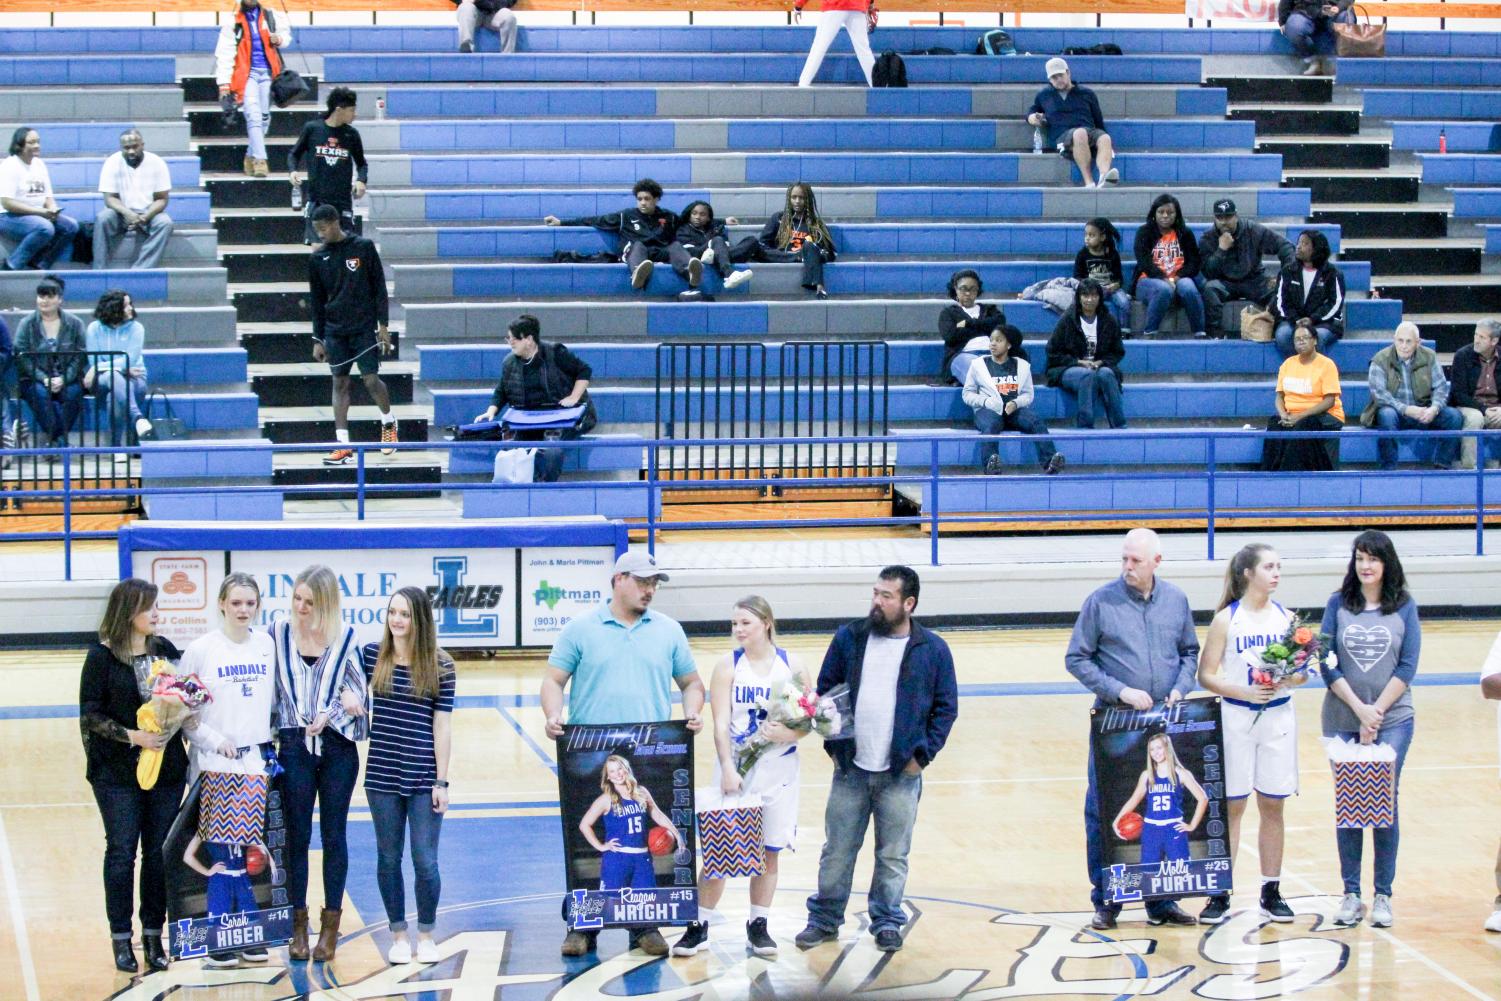 Seniors Sarah Kiser, Reagan Wright and Molly Purtle are presented at senior night. They were escorted by family members to be acknowledged for their dedication to the team.